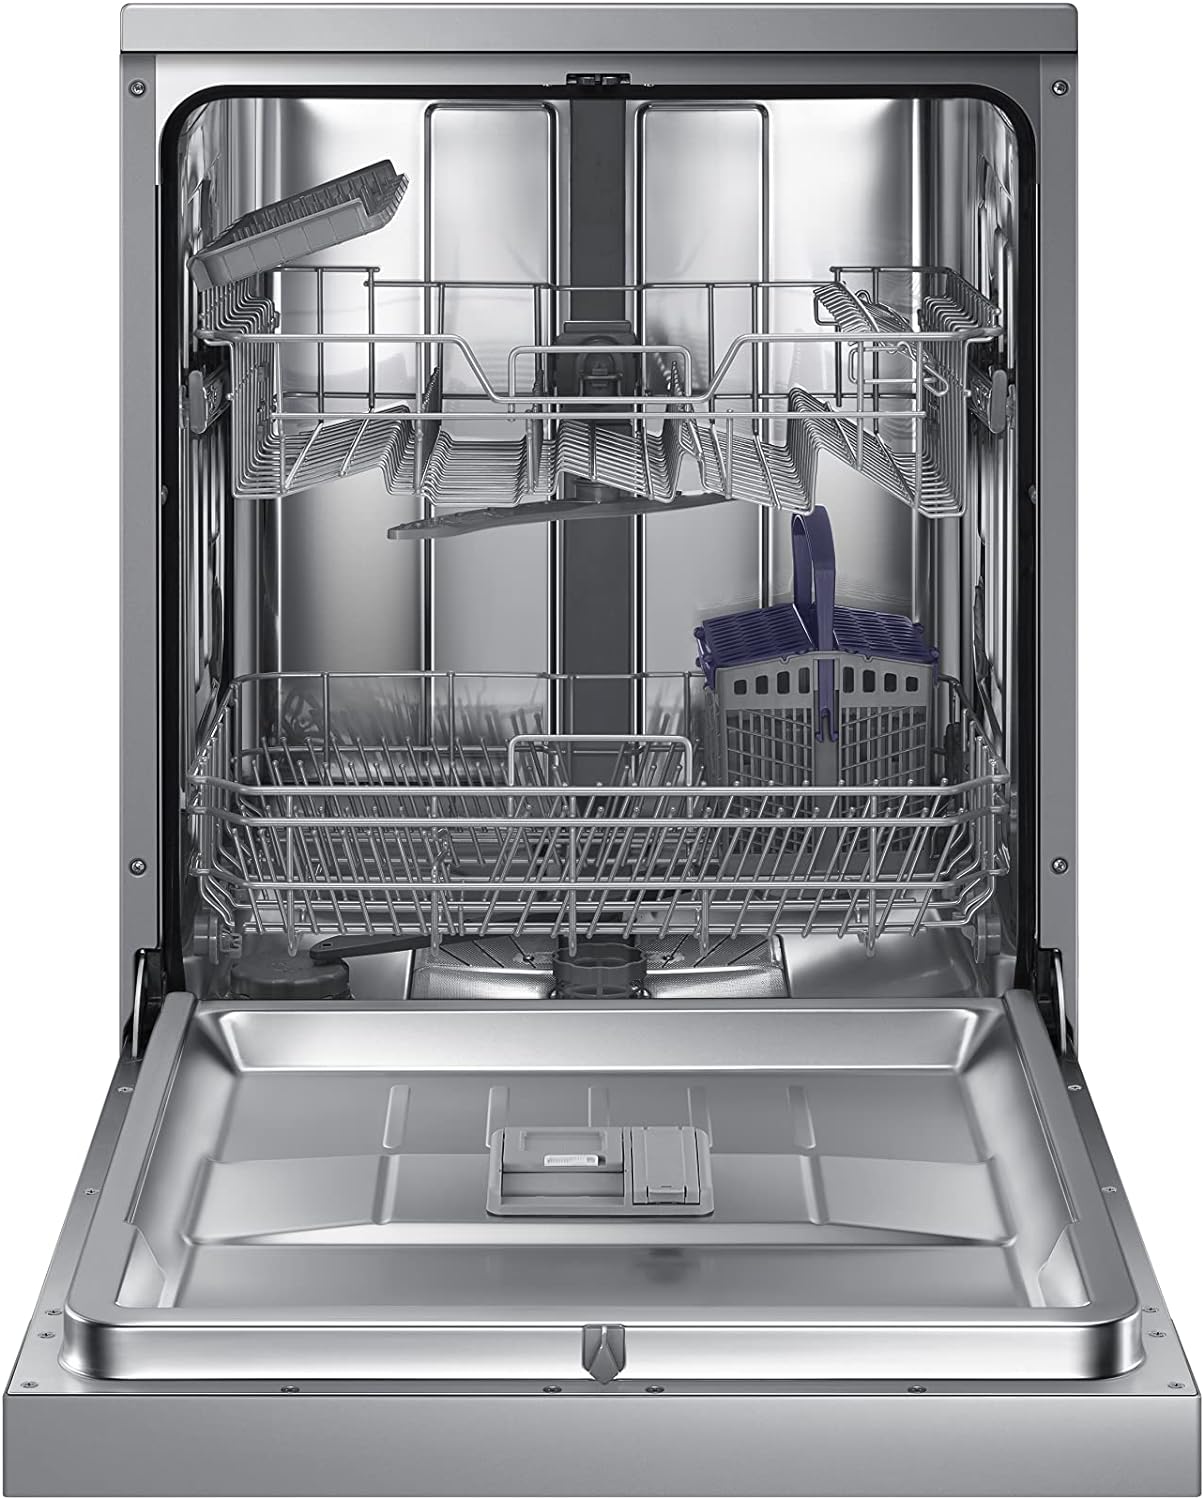 Samsung DW60M5050FS/EU Series 5 Dishwasher, Freestanding, Full Size, 13 Place Settings - Amazing Gadgets Outlet